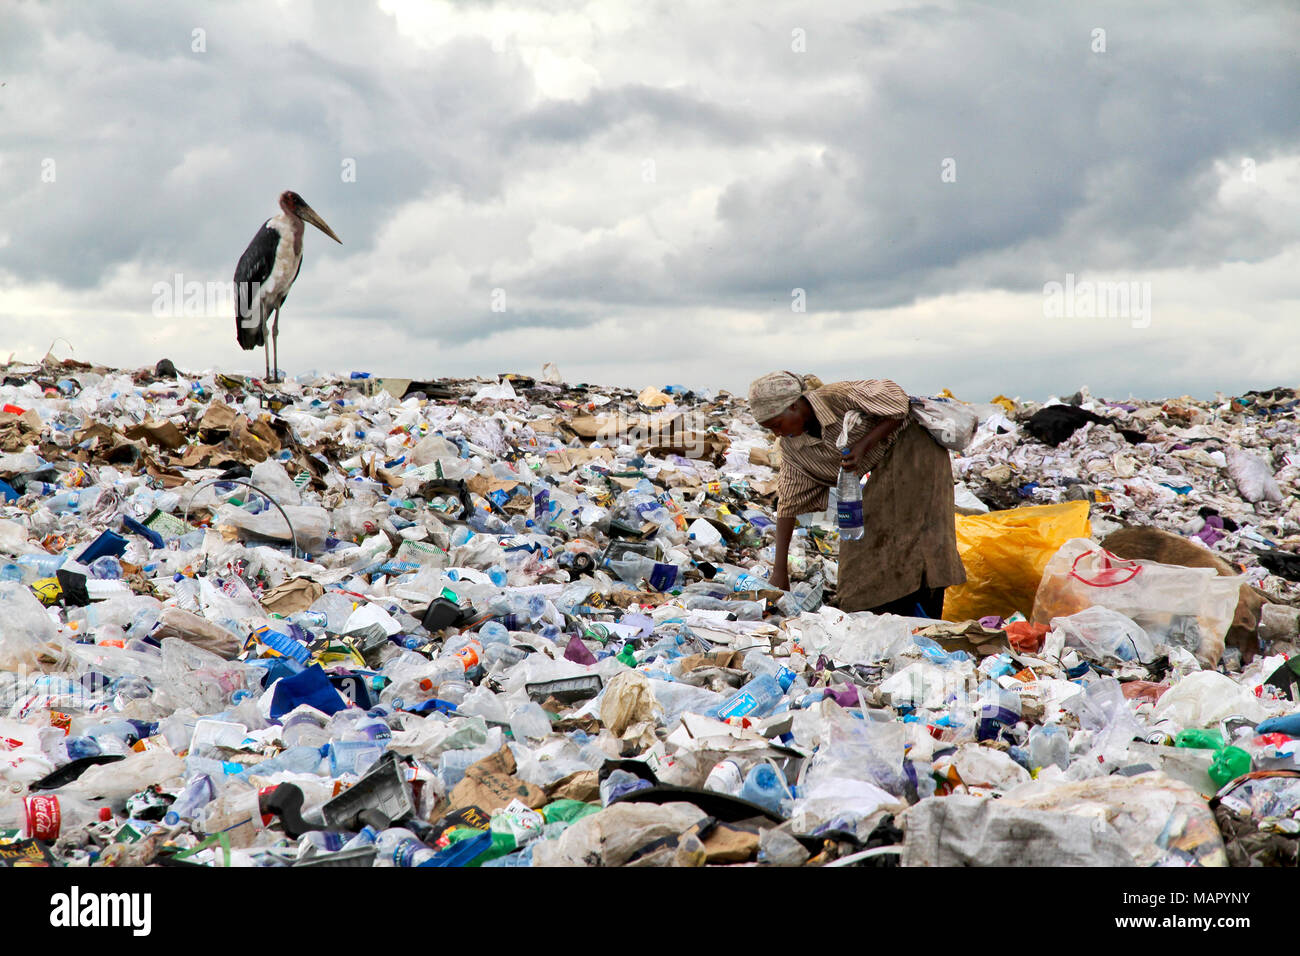 Woman working on one of the world biggest garbage dump with a stork waiting for food, in the Dandora slum of Nairobi, Kenya, East Africa, Africa Stock Photo